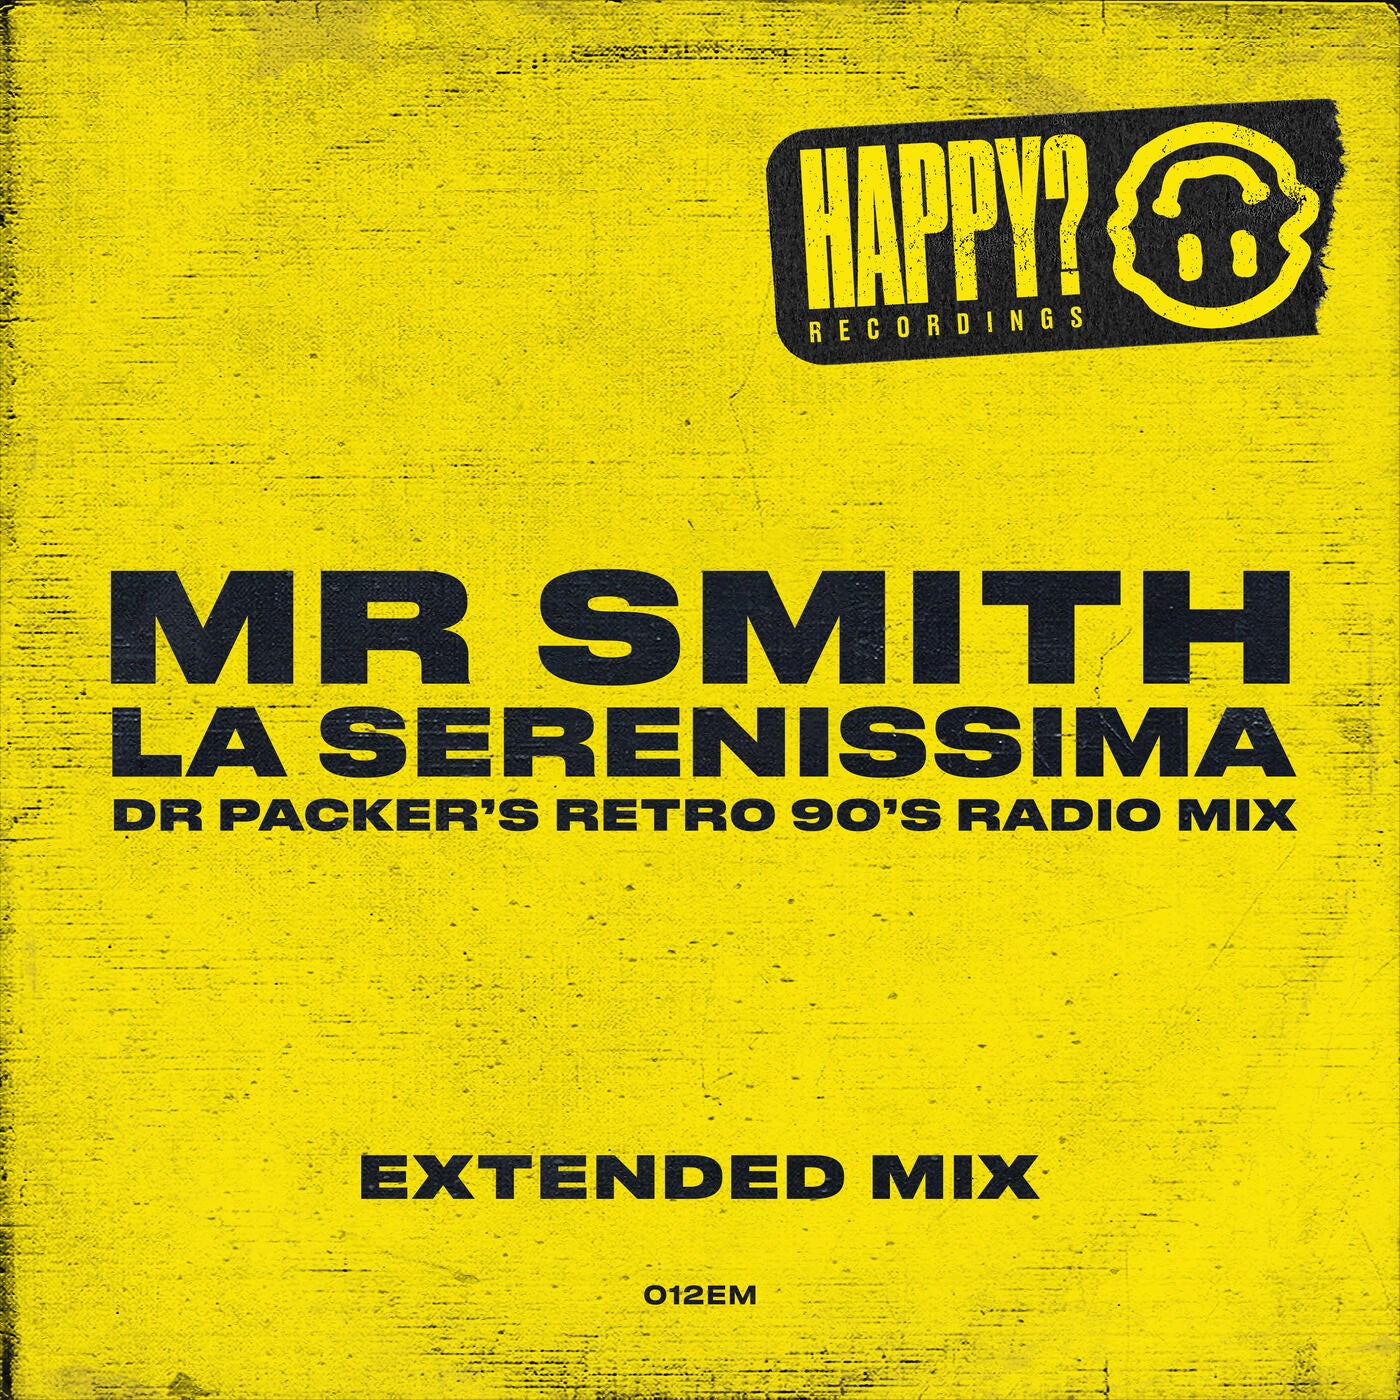 La Serenissima (Dr Packer's Retro 90's Extended Mix)